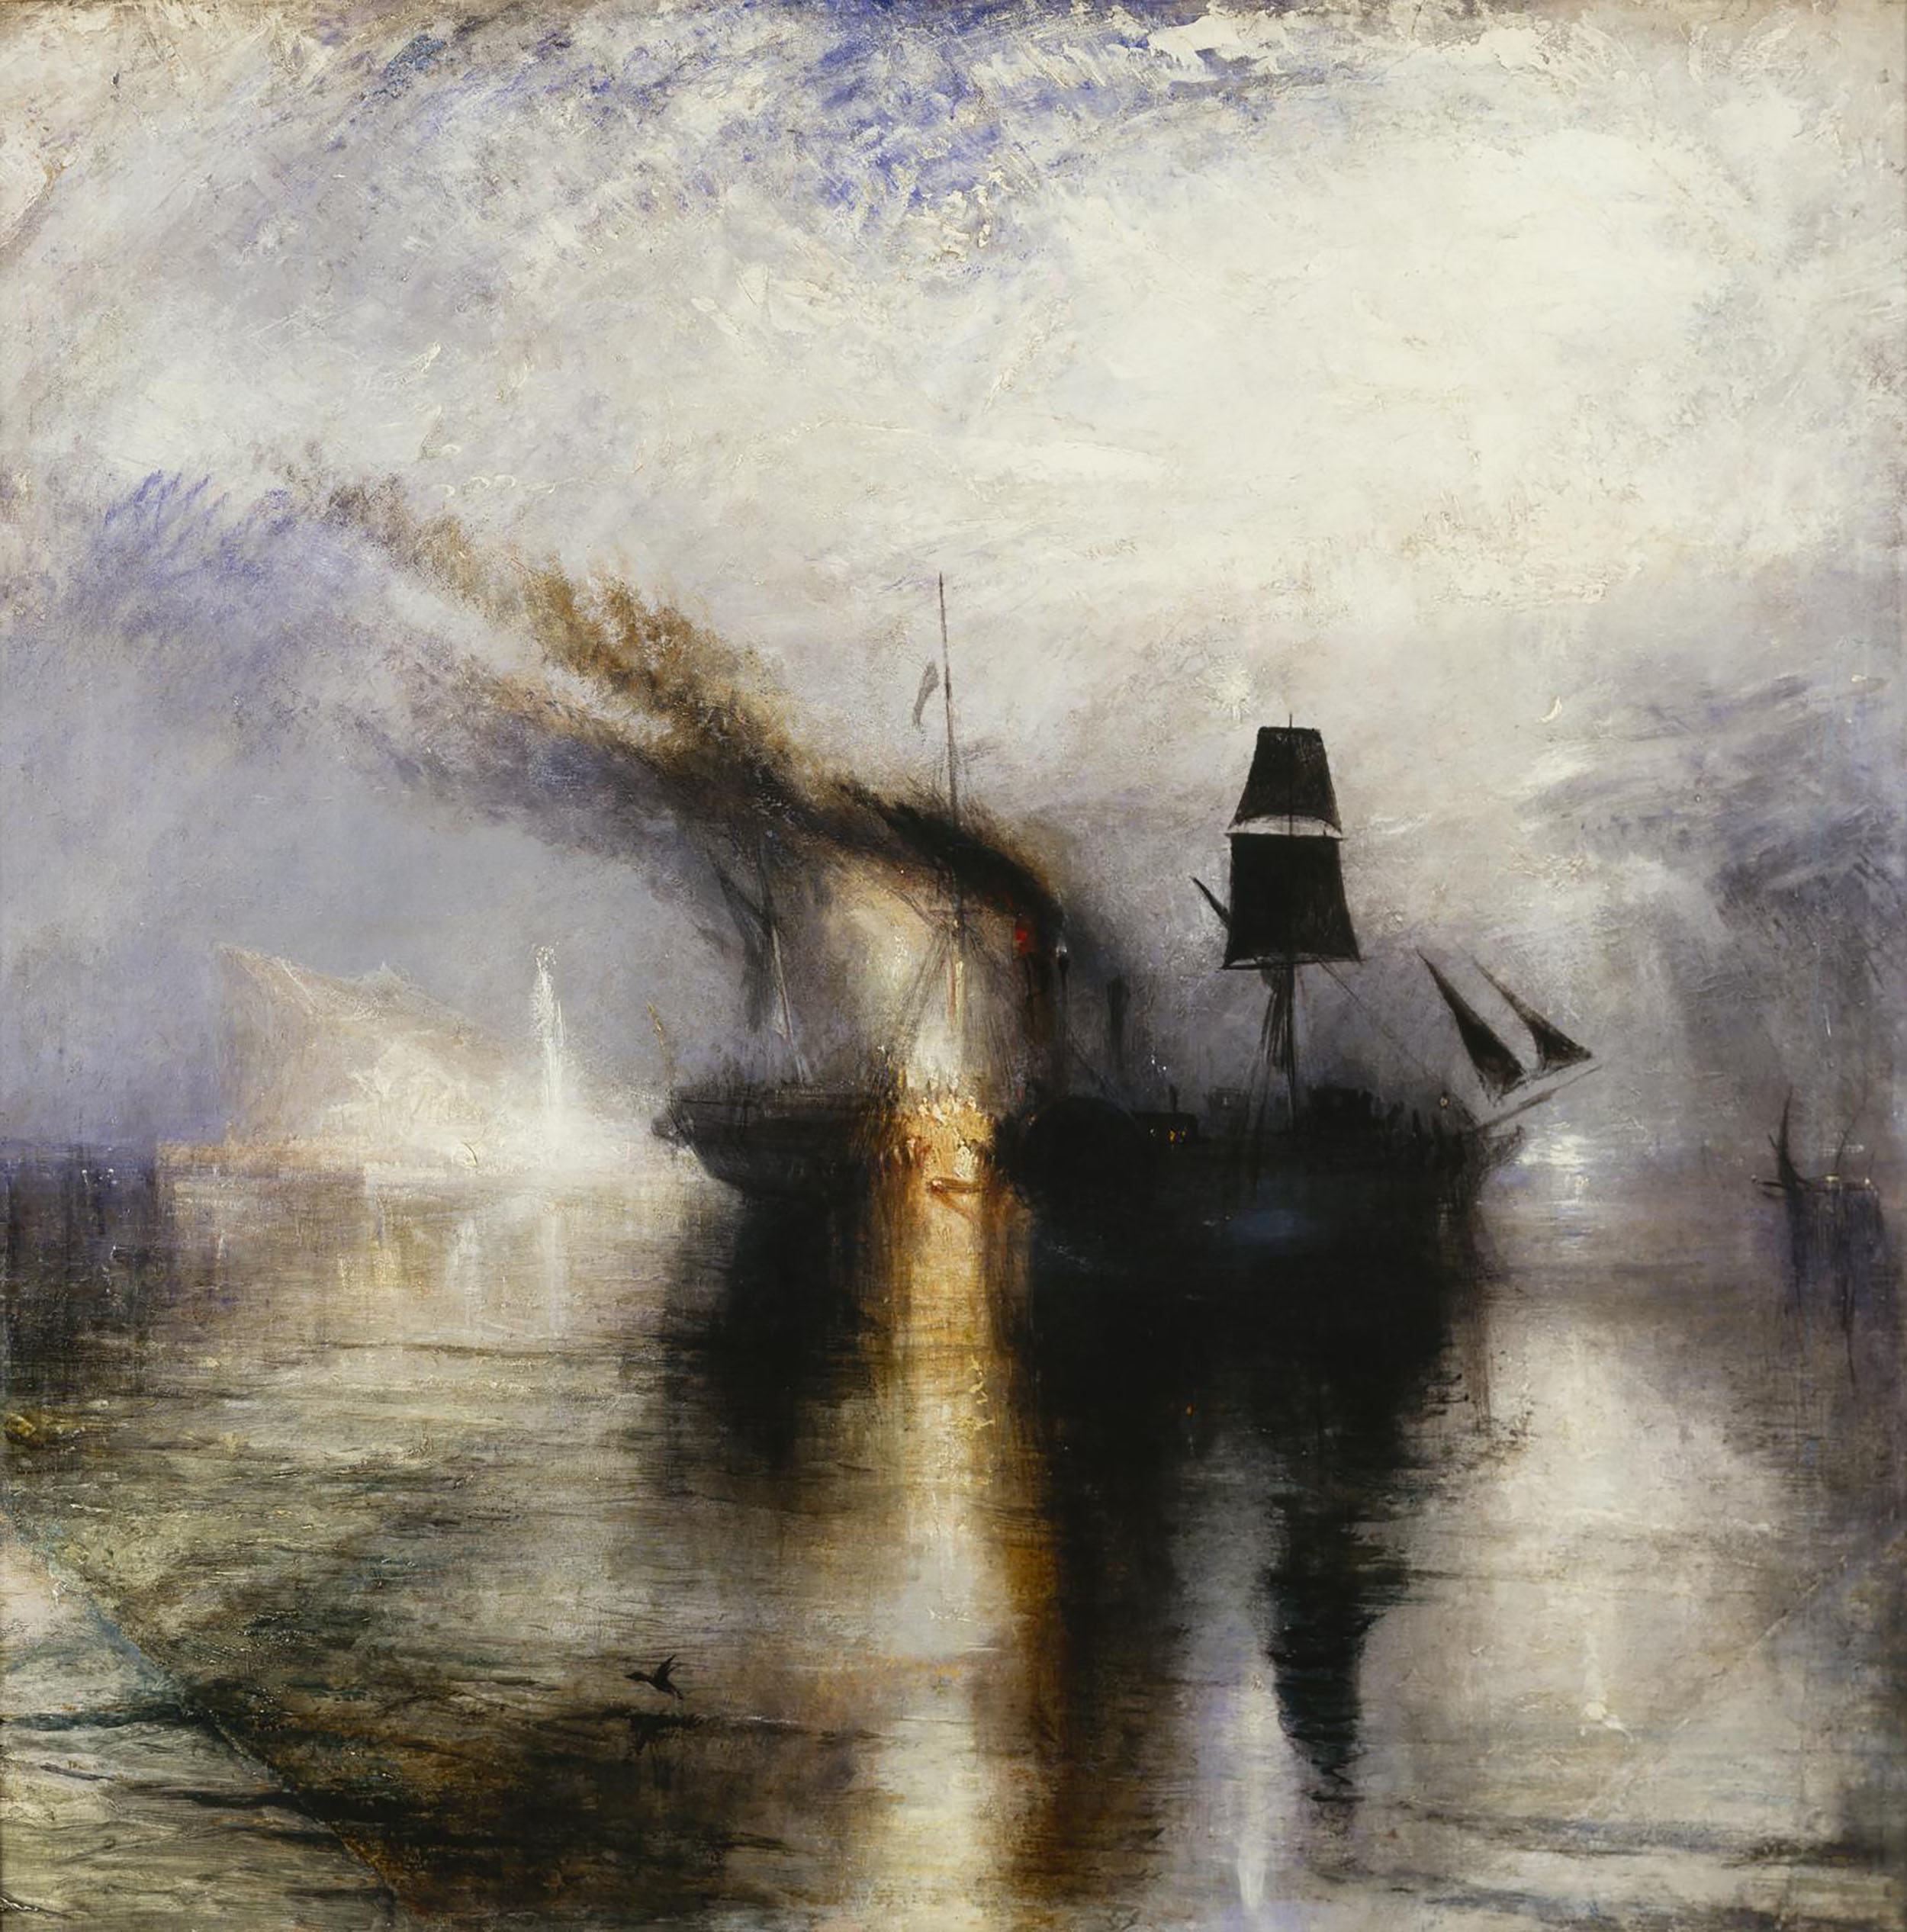 Peace - Burial at Sea exhibited 1842 by Joseph Mallord William Turner 1775-1851